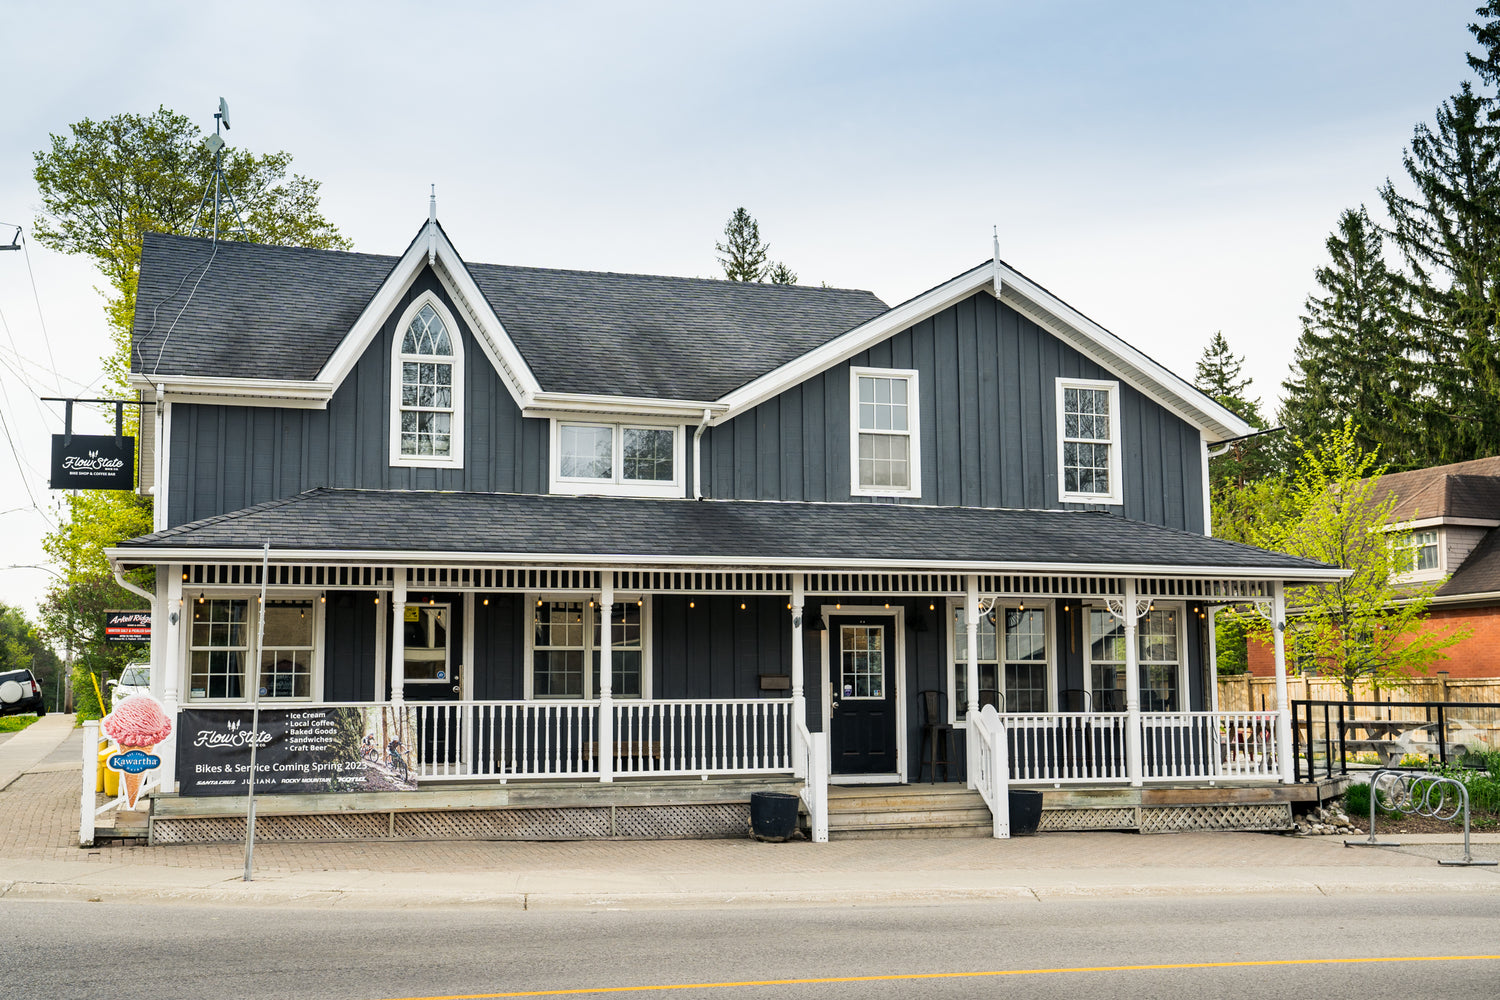 Street view of Flow State Bike Co in Arkell, Ontario